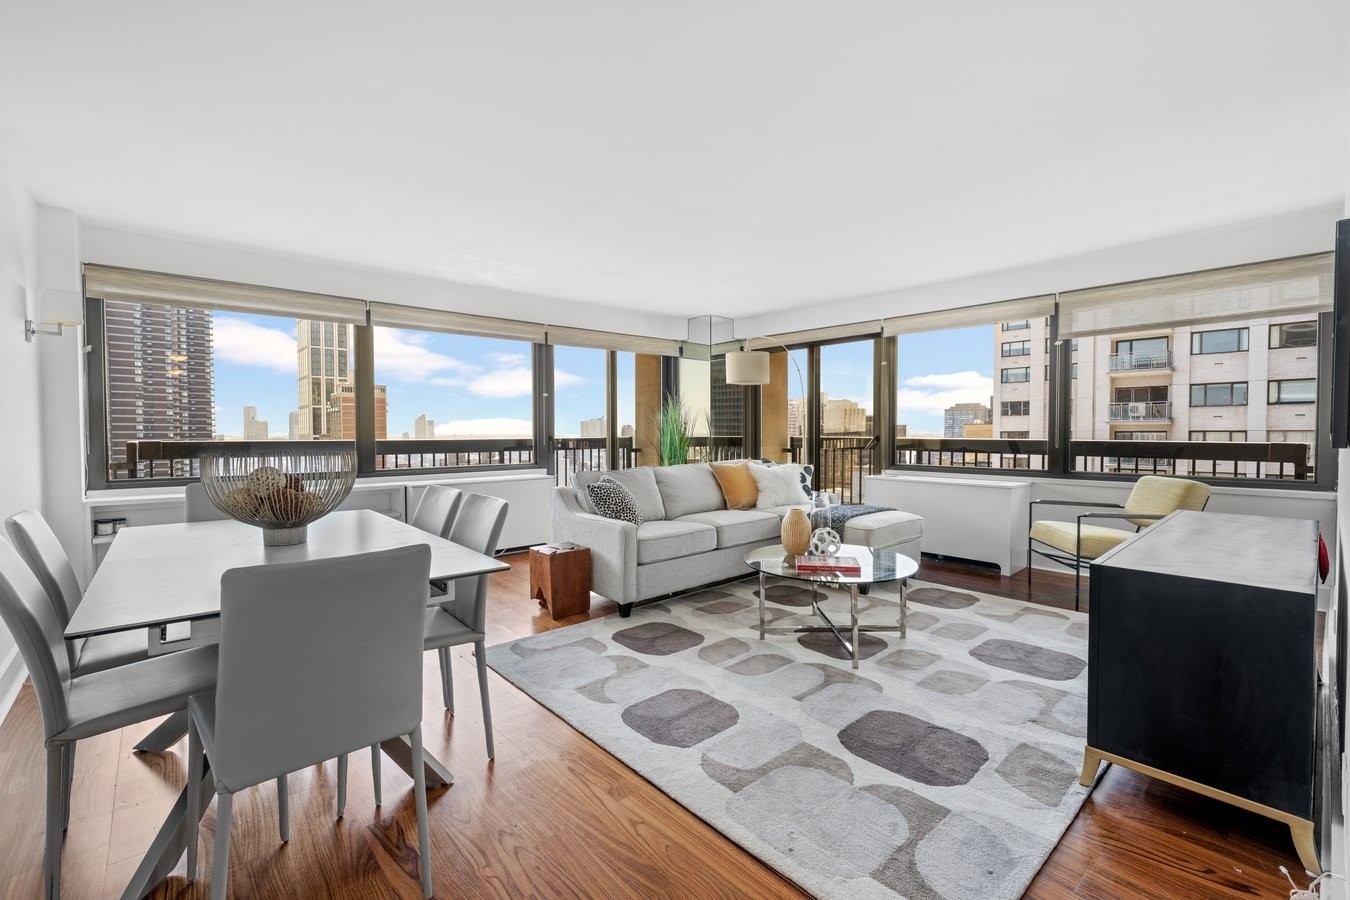 Co-op Properties for Sale at The Landmark, 300 E 59TH ST, 2701 Midtown East, New York, NY 10022